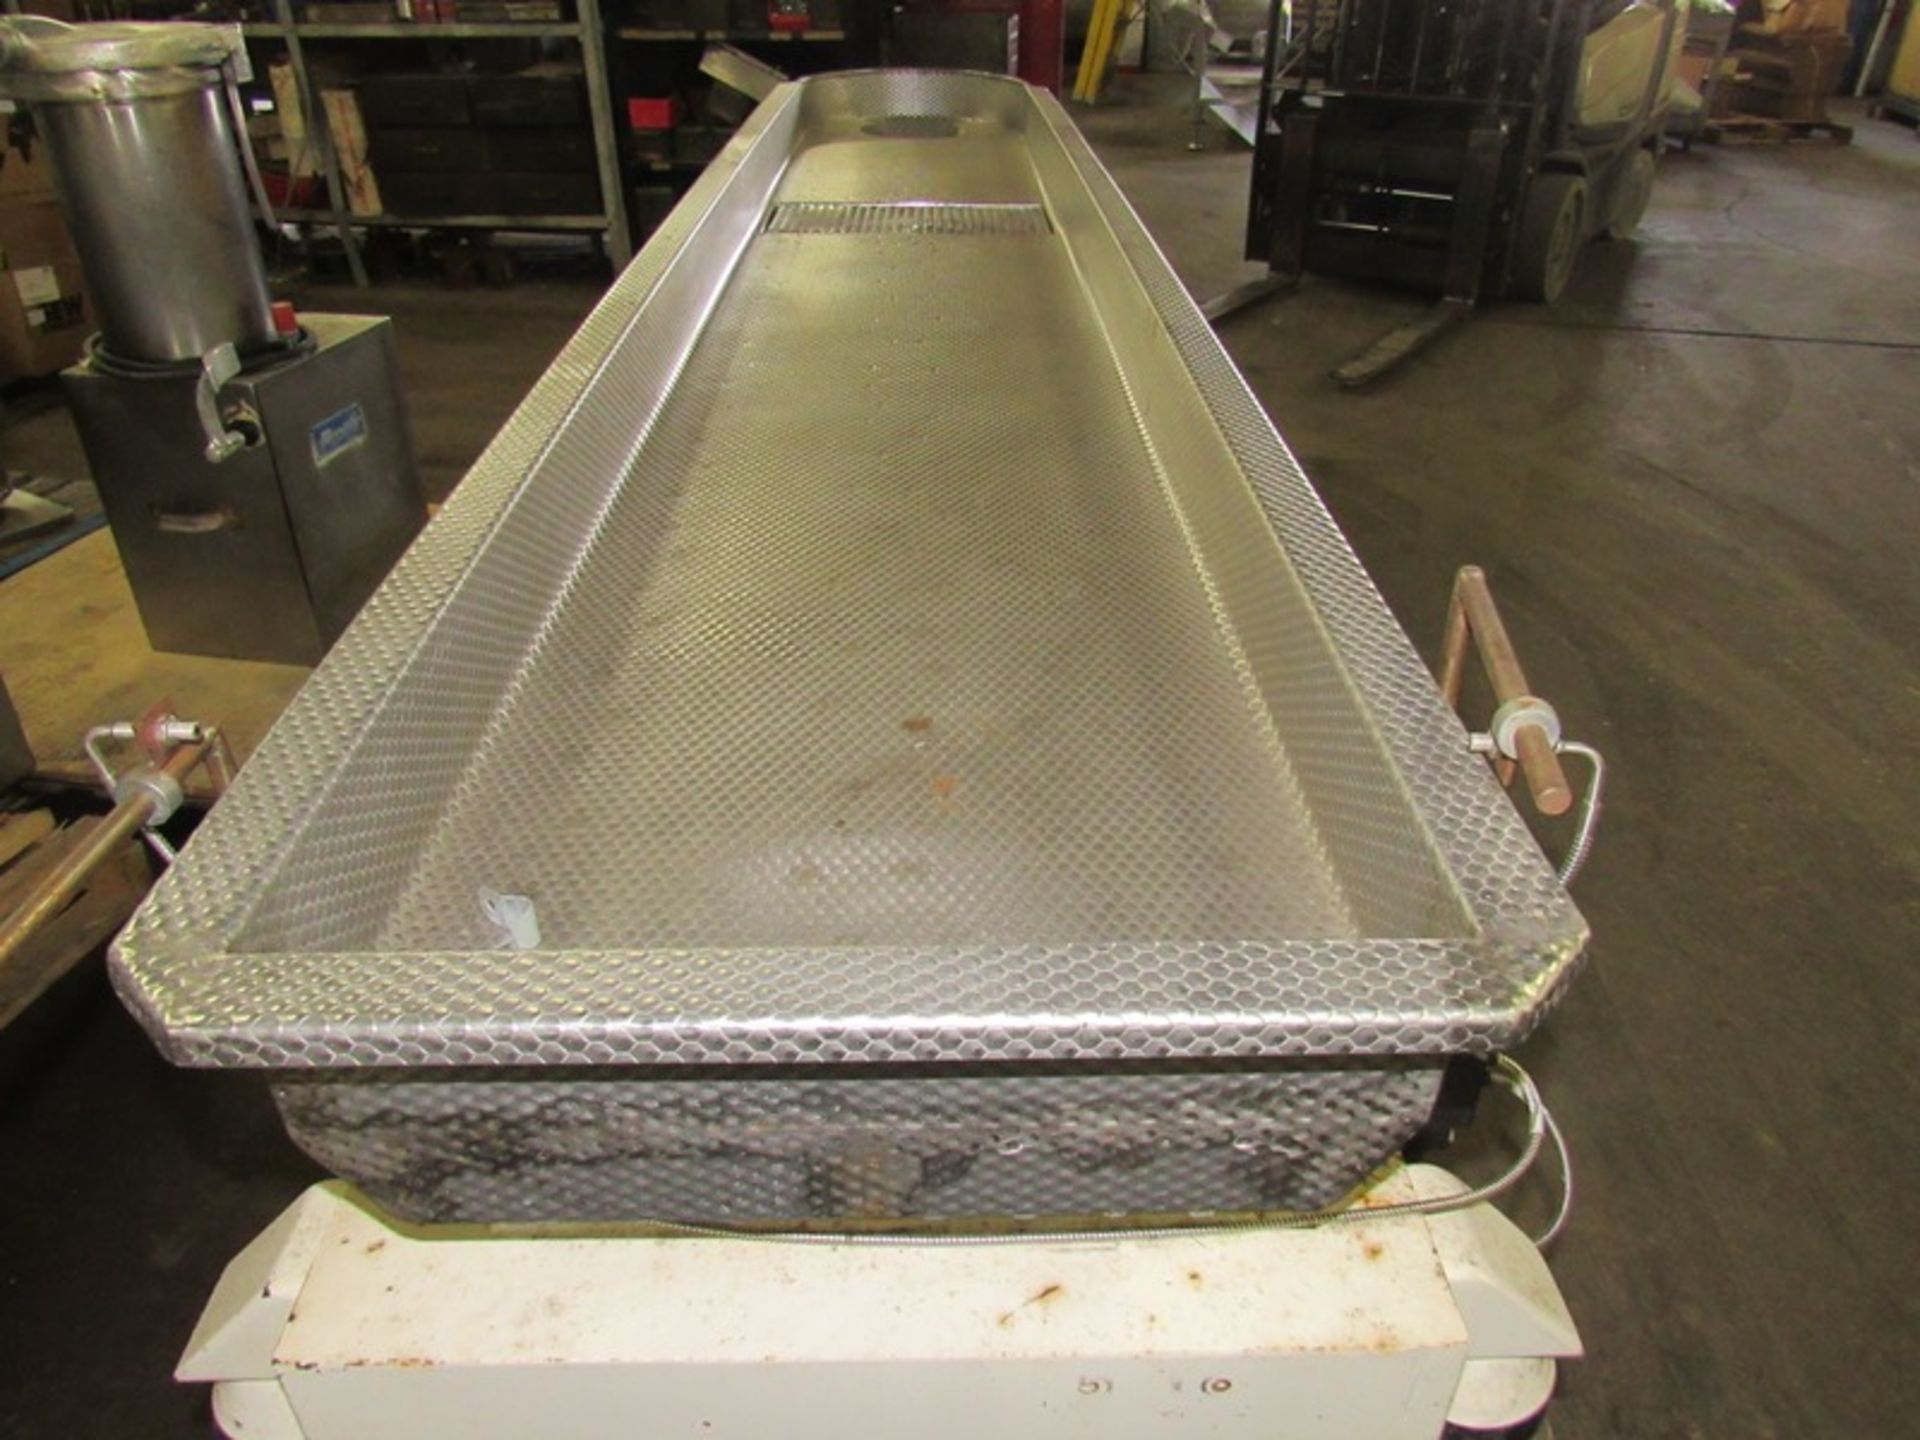 Smalley Mdl. EMC2t Vibratory Conveyor, dimpled stainless steel tray, 18" W X 115" L X 4" D, 9" - Image 3 of 6